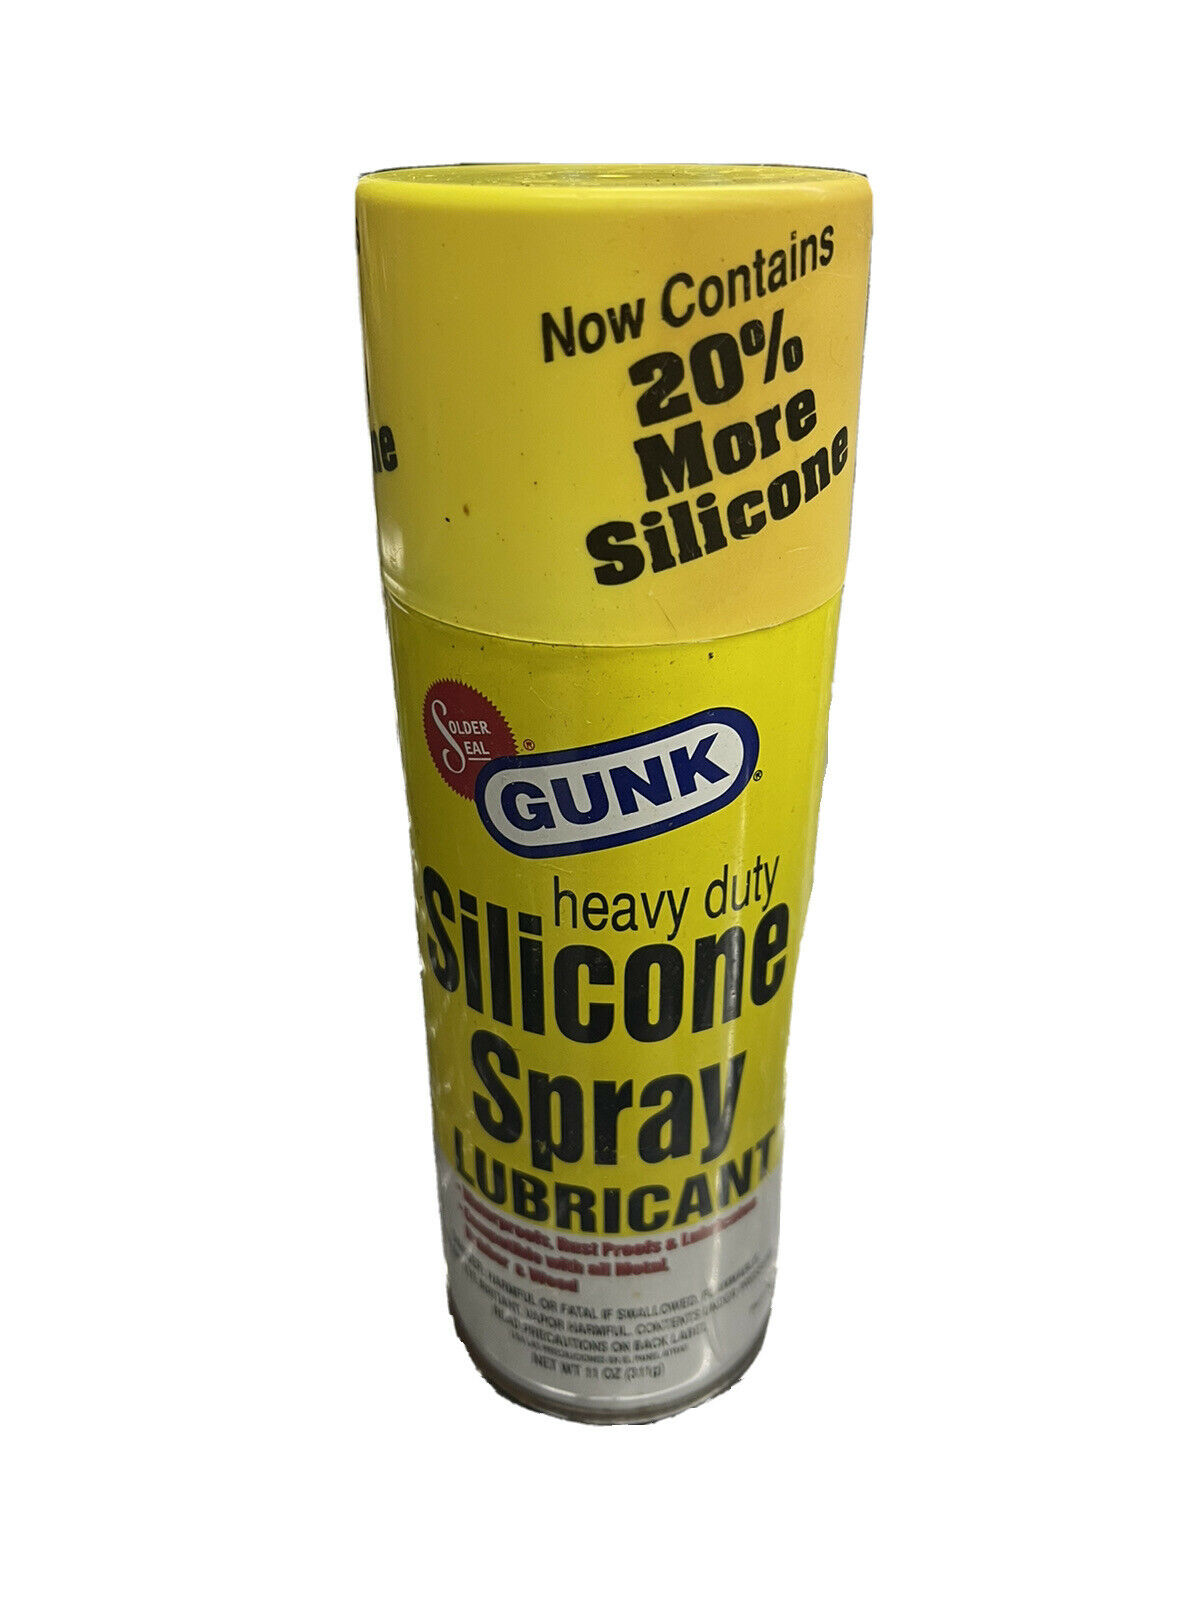 NEW! LOT OF 4 SOLDER SEAL GUNK SILICONE SPRAY LUBRICANT, M9-14